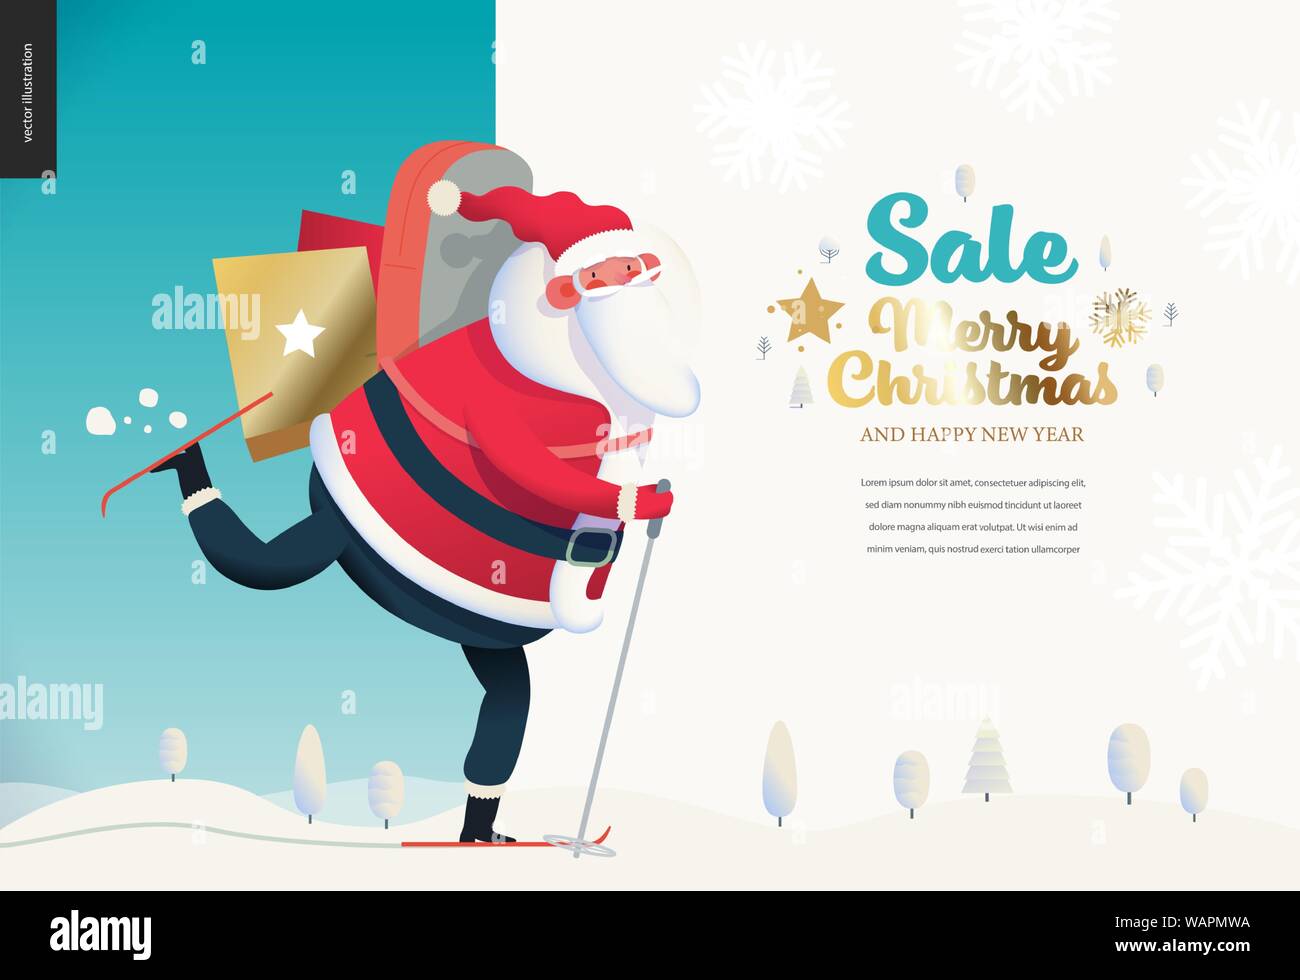 Skiing Santa Claus Christmas Sale Flyer Modern Flat Vector Concept Illustration Of Cheerful Santa Claus Skiing With Shopping Bags On The Snow Cove Stock Vector Image Art Alamy